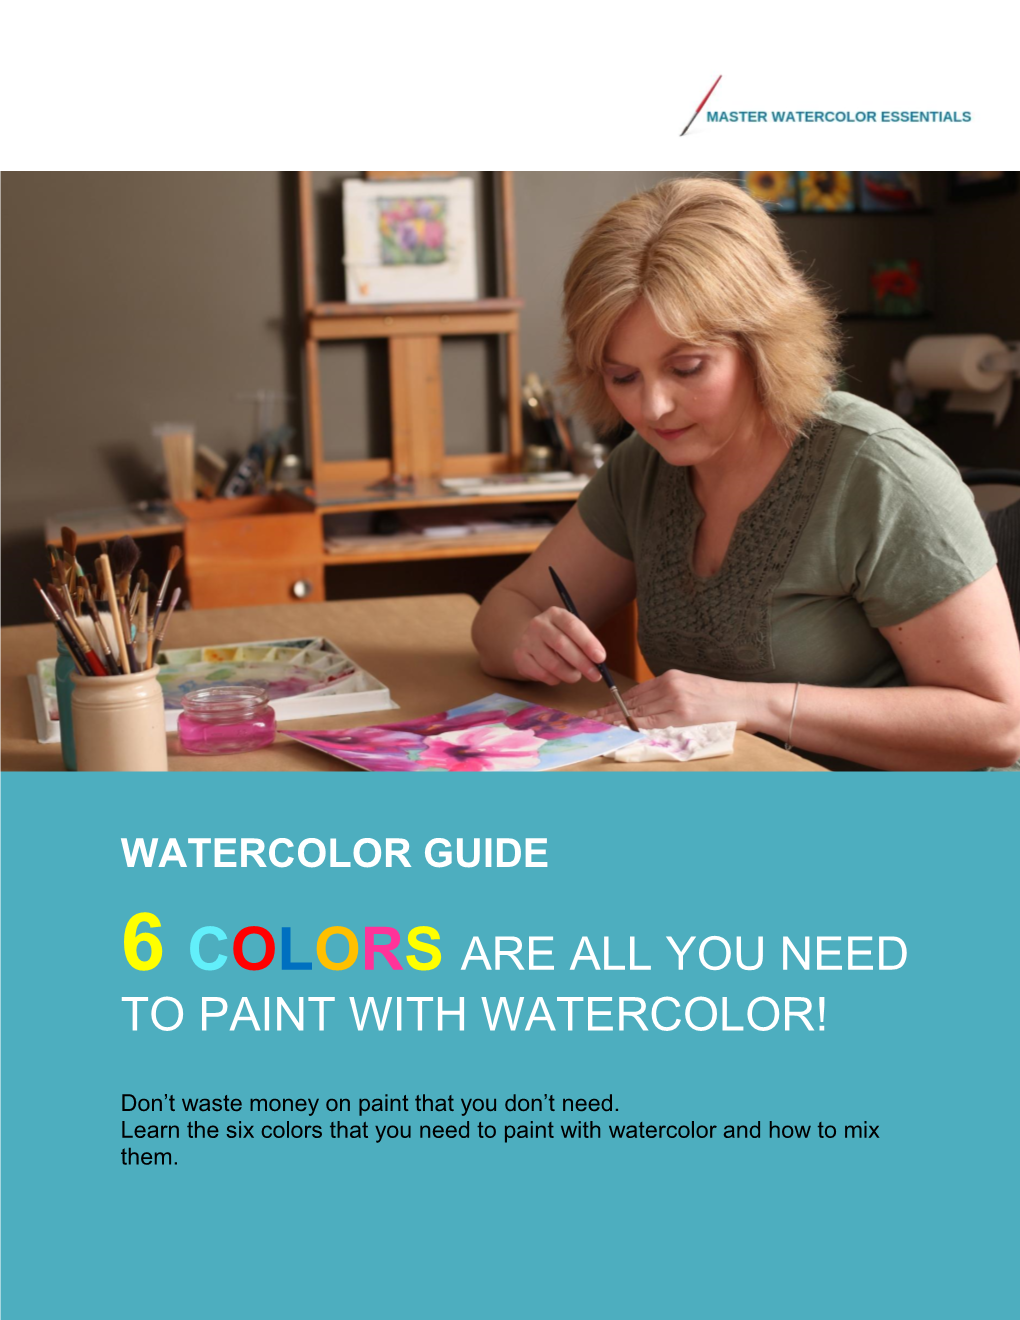 6 Colors Are All You Need to Paint with Watercolor!